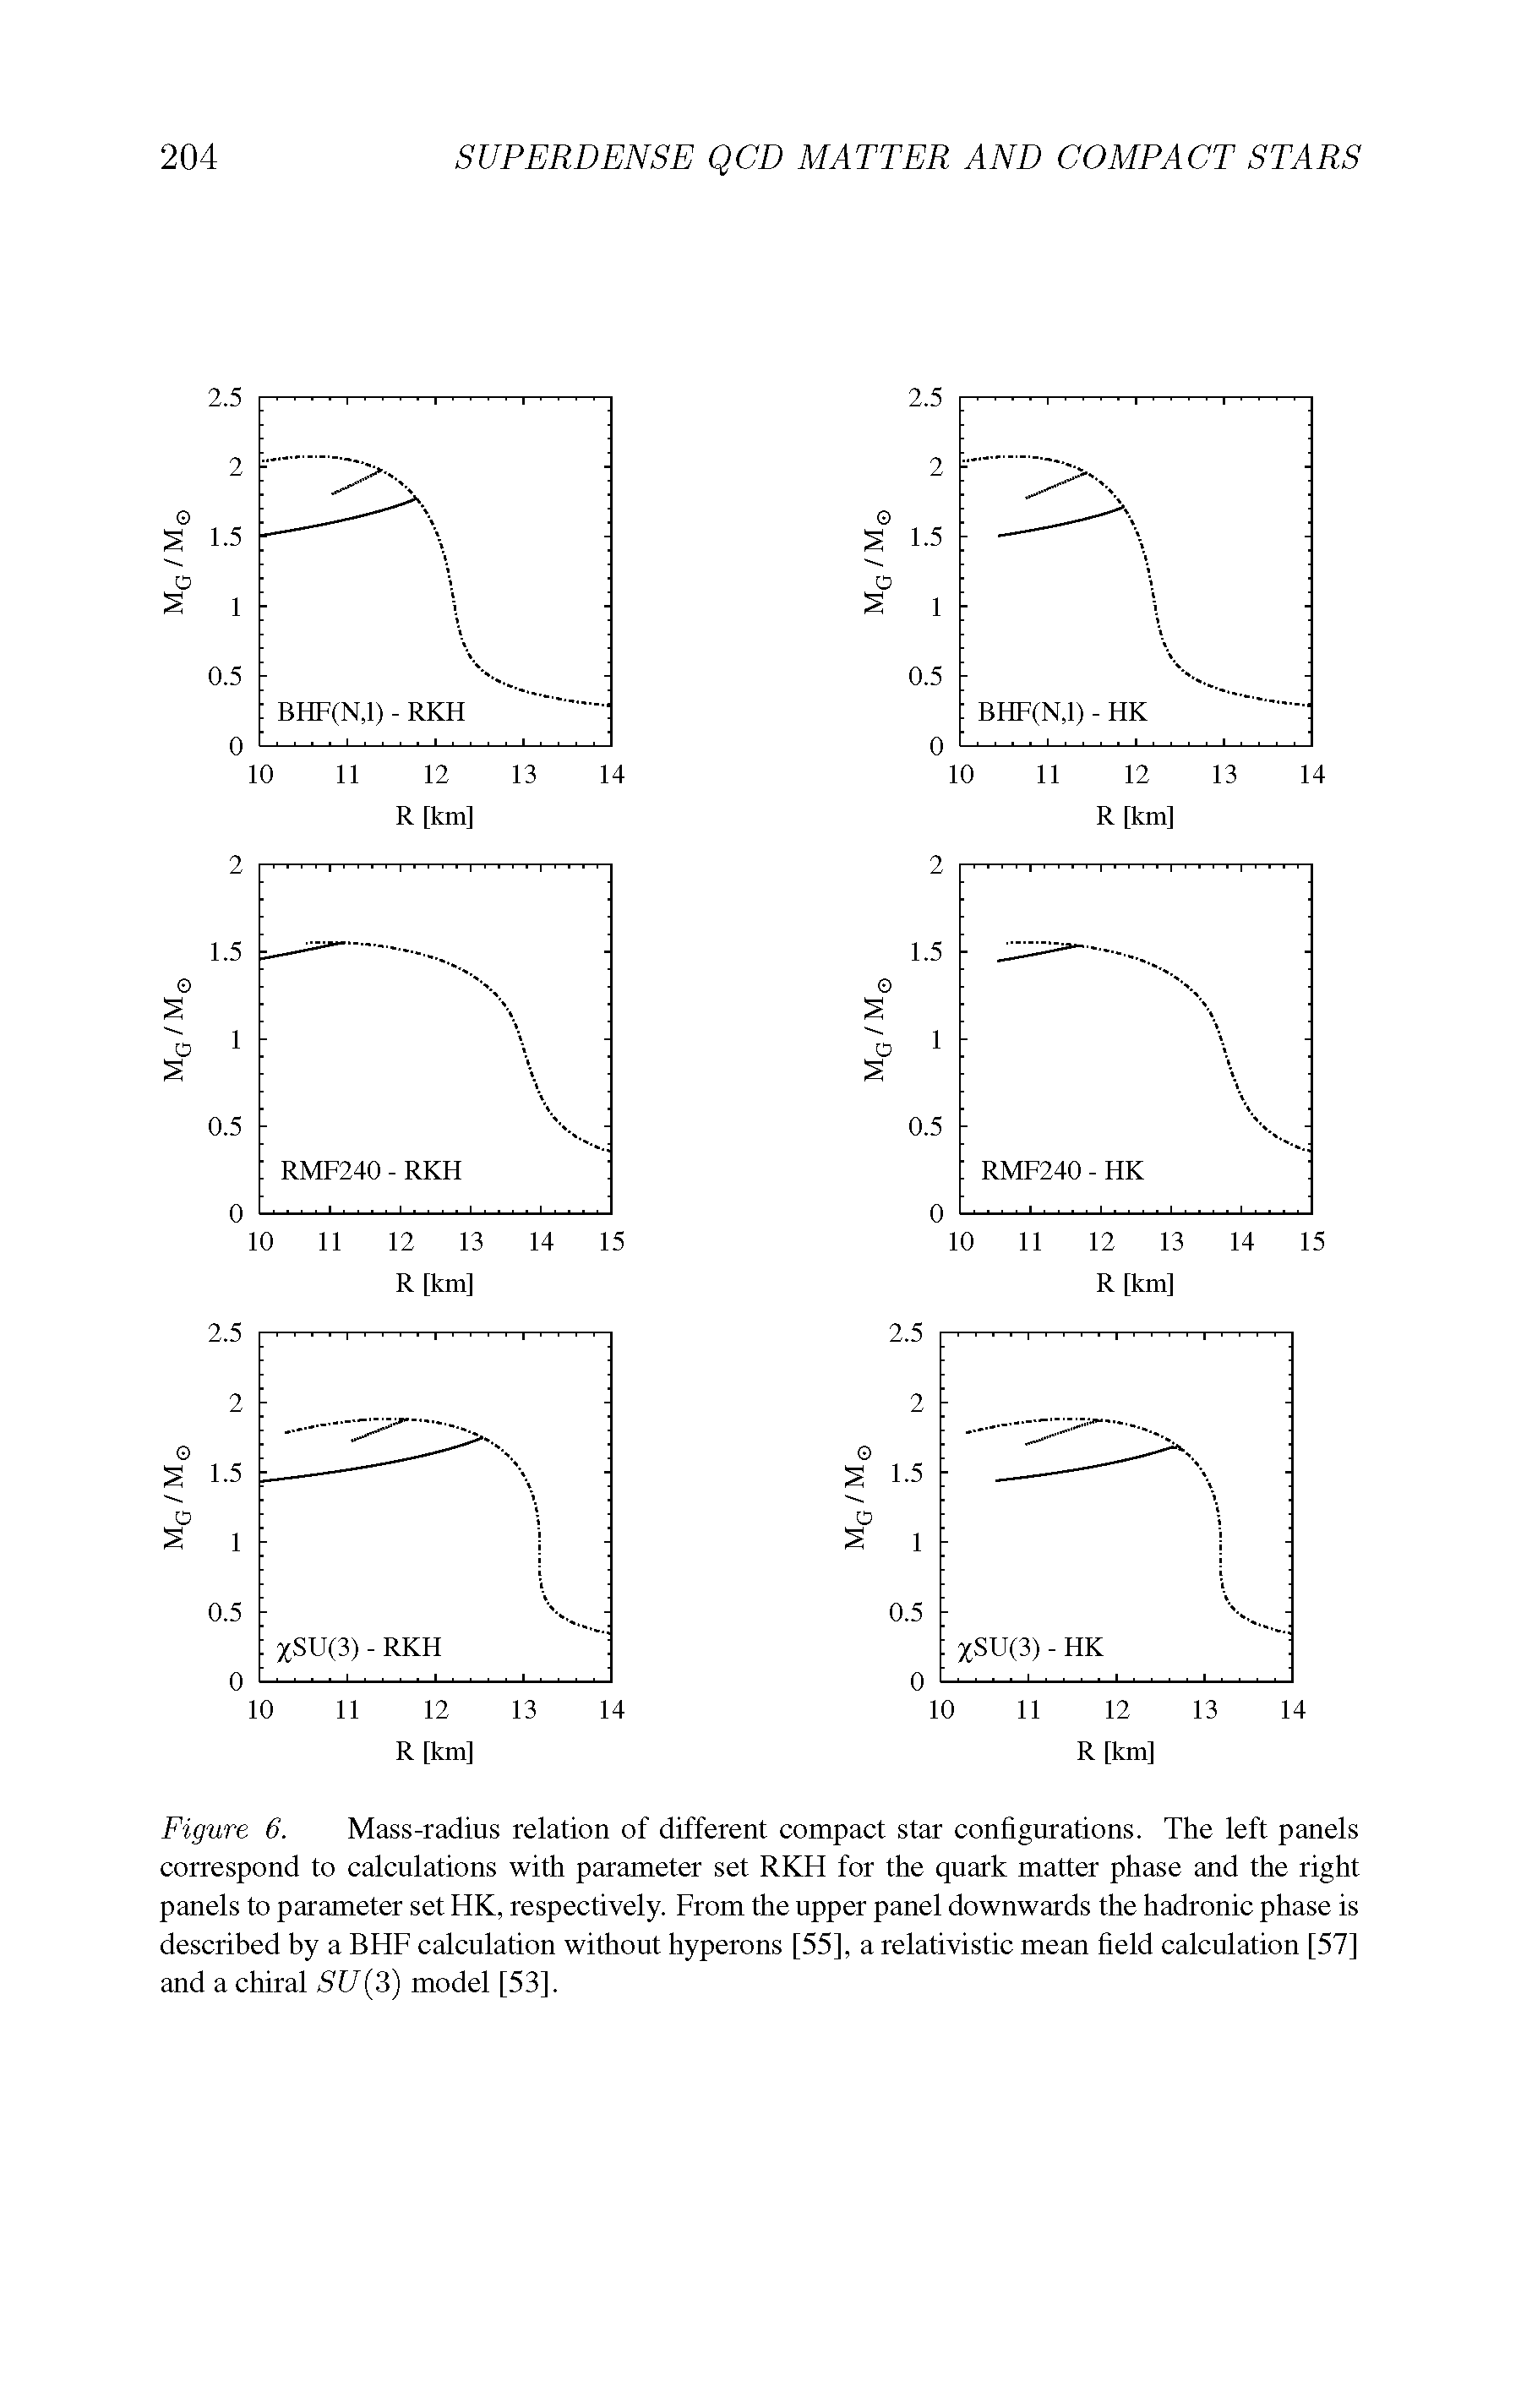 Figure 6. Mass-radius relation of different compact star configurations. The left panels correspond to calculations with parameter set RKH for the quark matter phase and the right panels to parameter set HK, respectively. From the upper panel downwards the hadronic phase is described by a BHF calculation without hyperons [55], a relativistic mean field calculation [57] and a chiral SU(3) model [53].